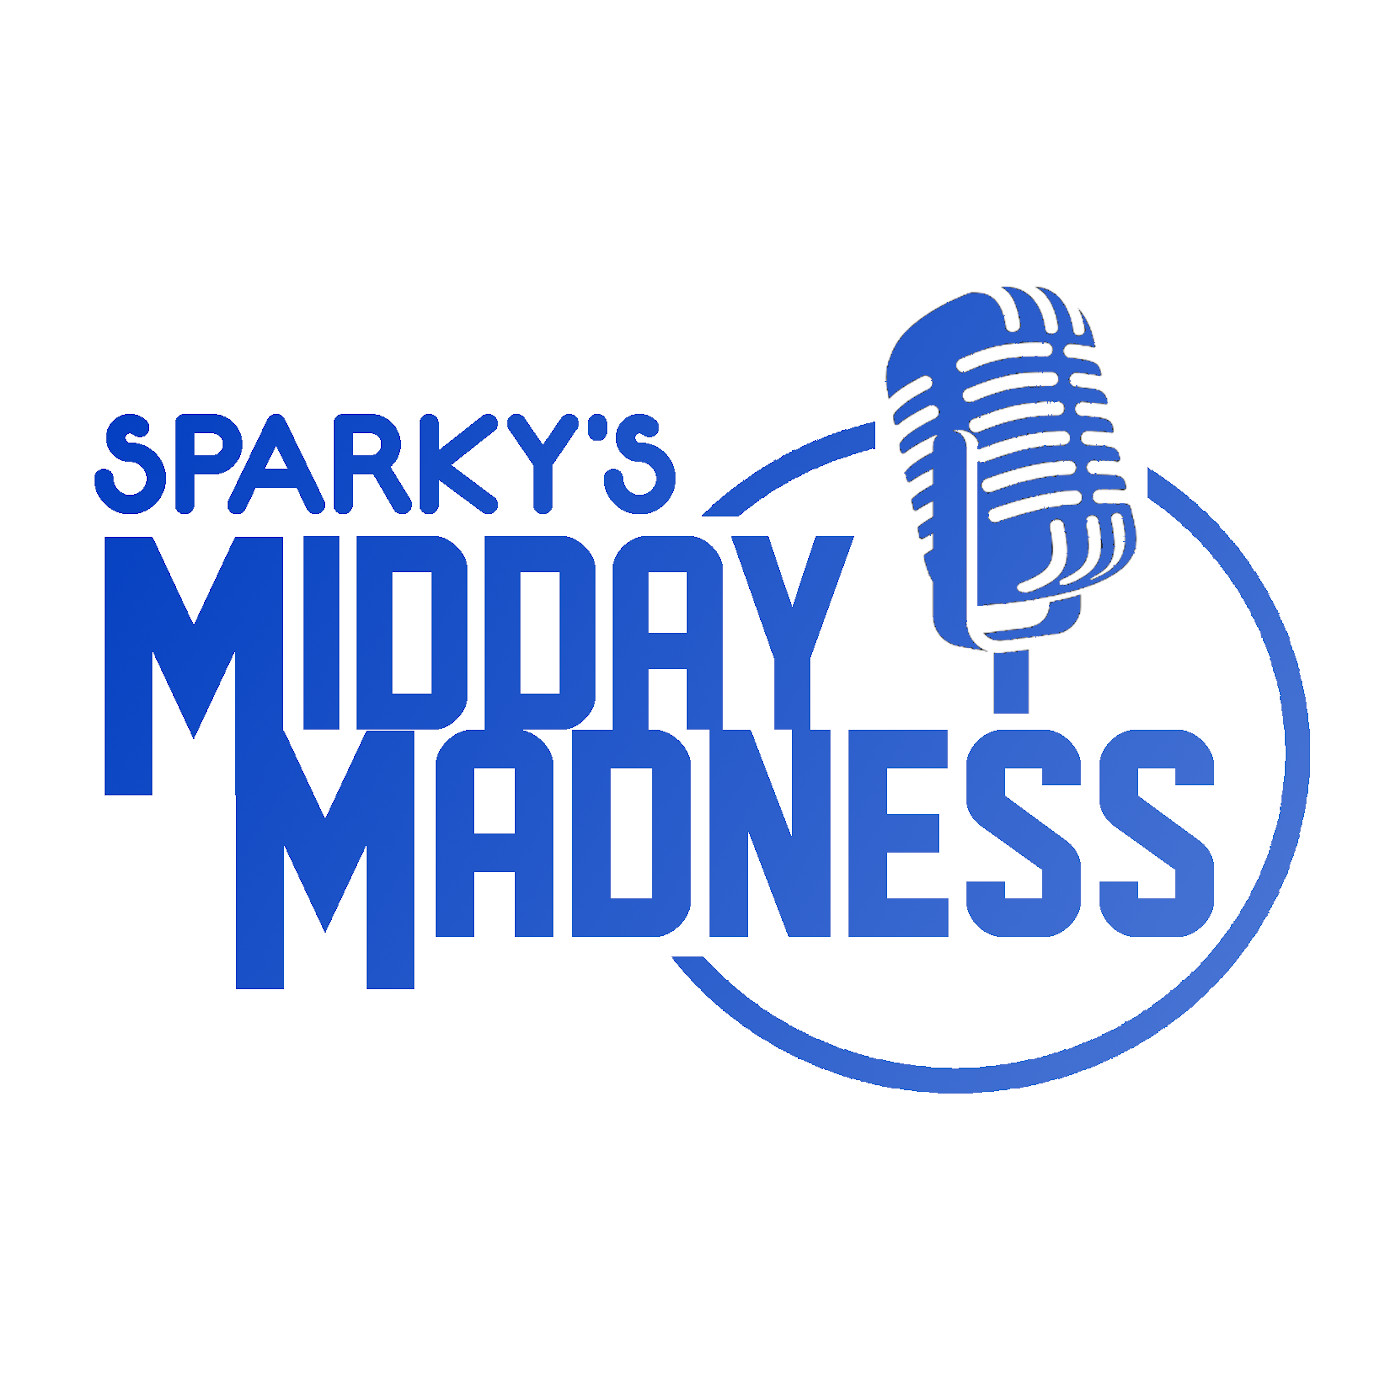 8-5-22 Sparky's Midday Madness